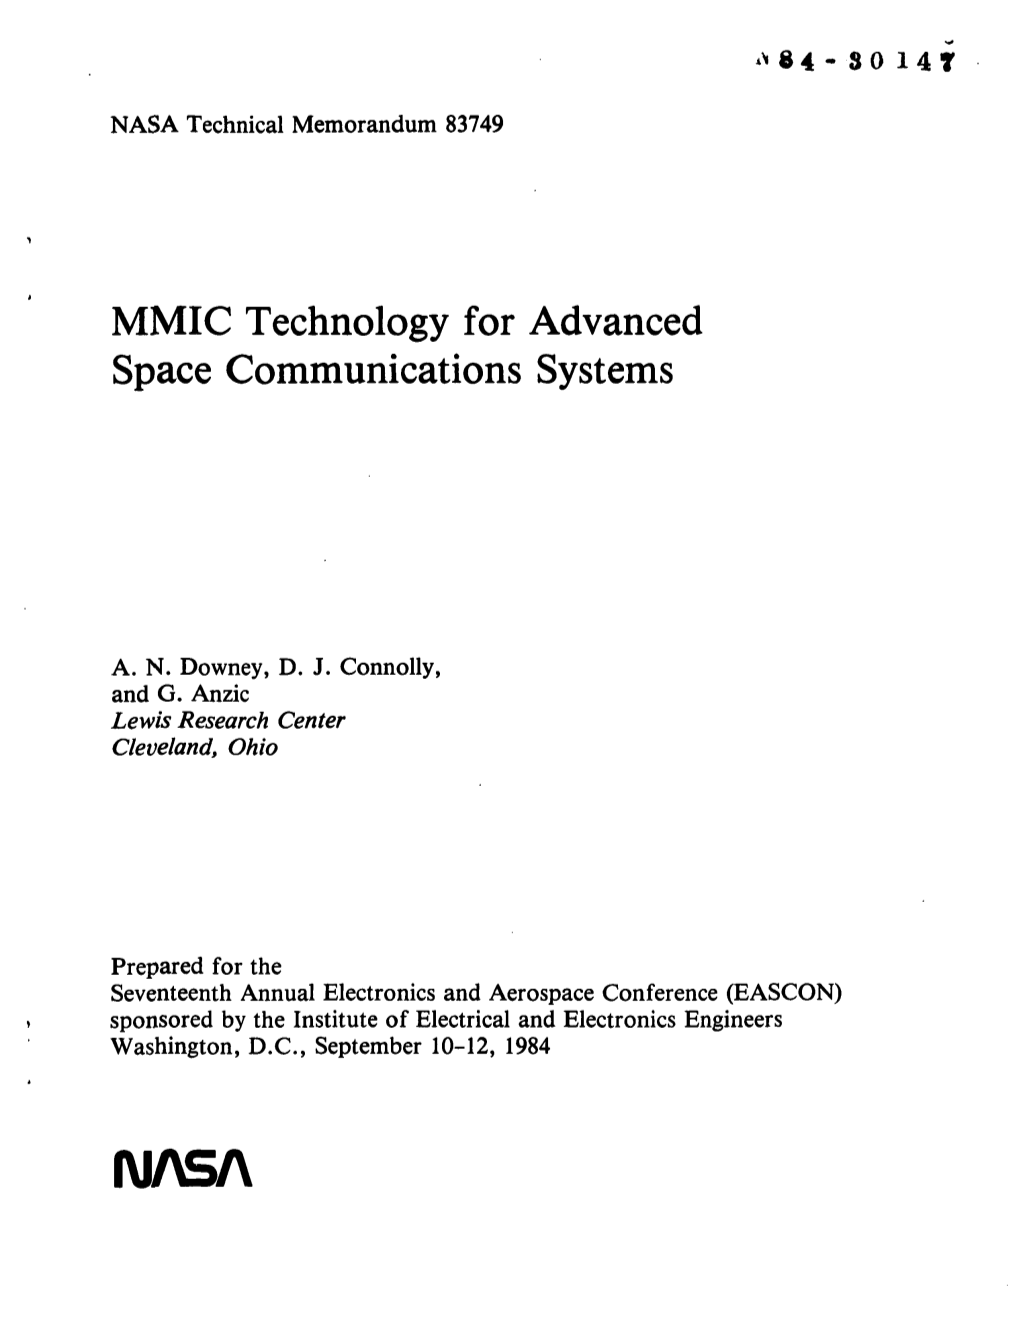 MMIC Technology for Advanced Space Communications Systems